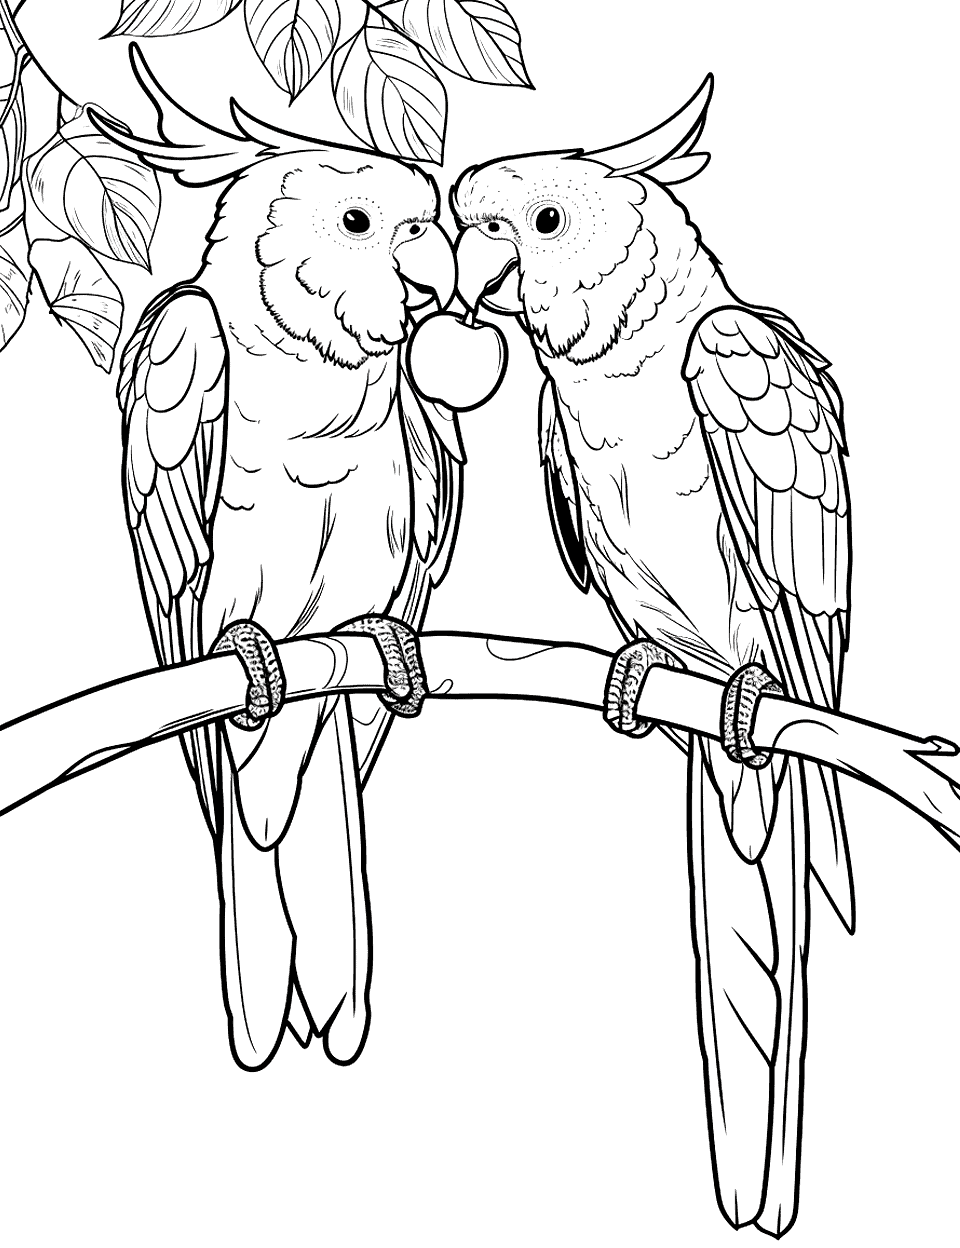 Parrots Sharing a Meal Parrot Coloring Page - Two parrots sharing a fruit on a tree, with minimal background details.